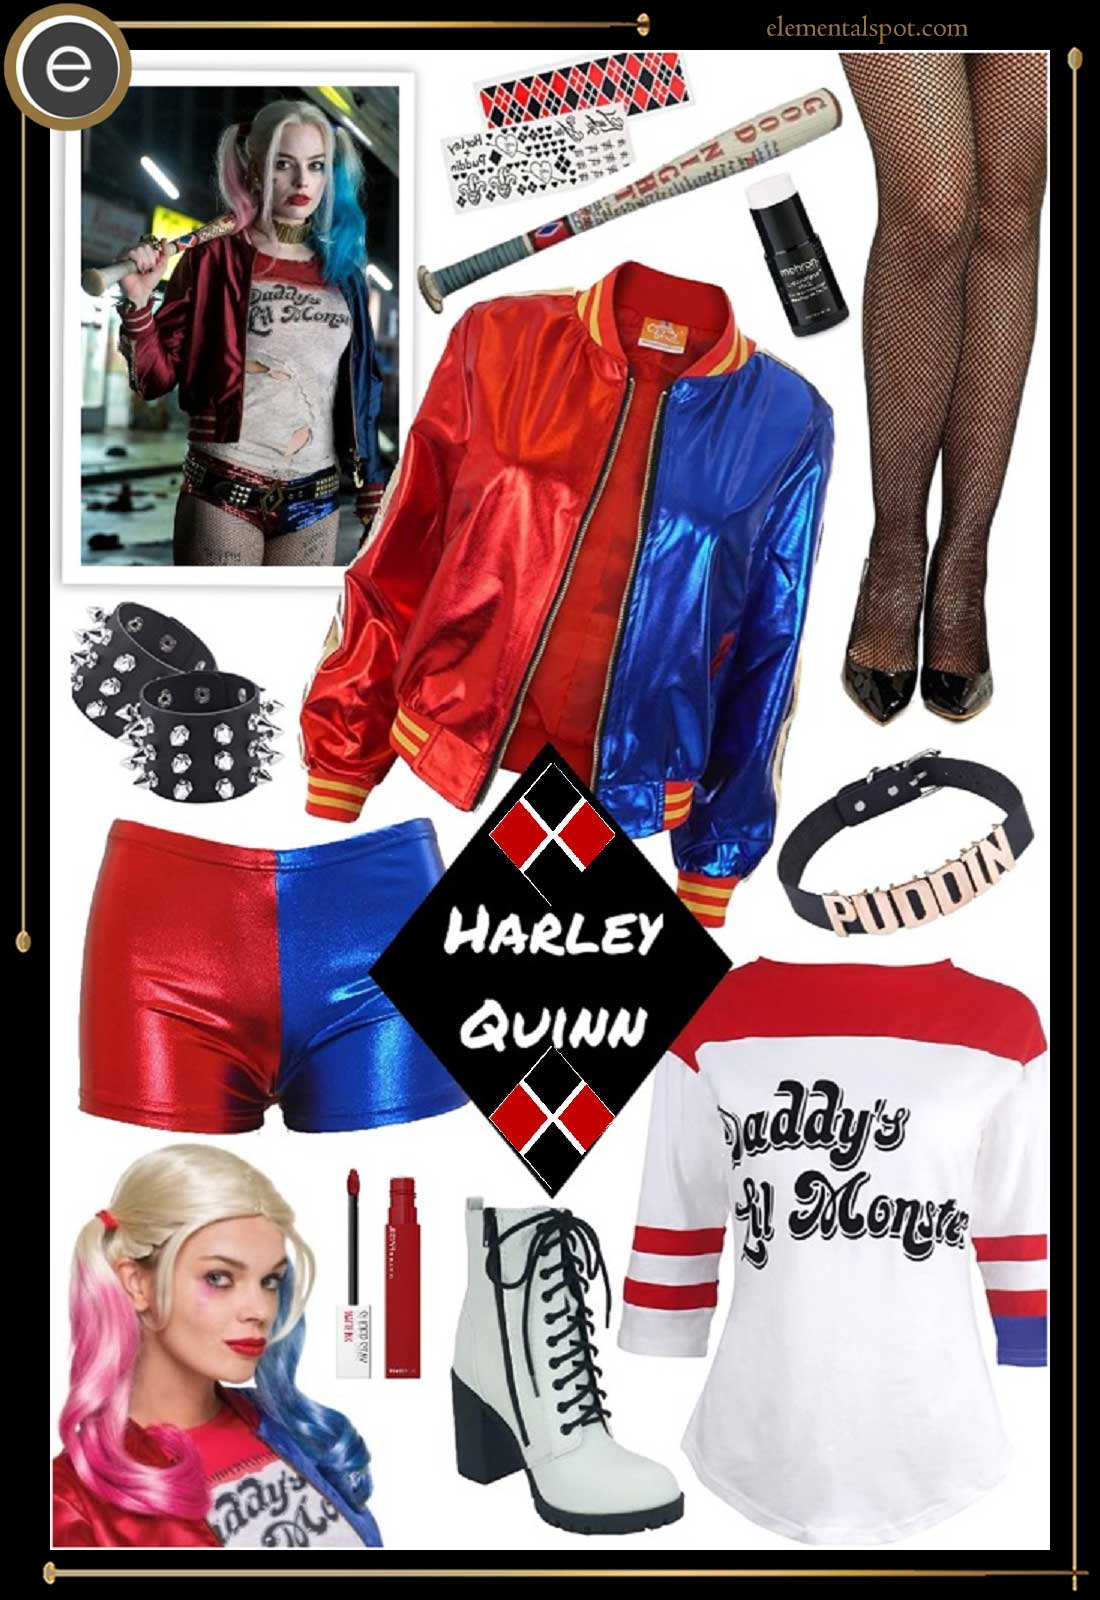 Dress Up Like Harley Quinn from Suicide Squad - Elemental Spot